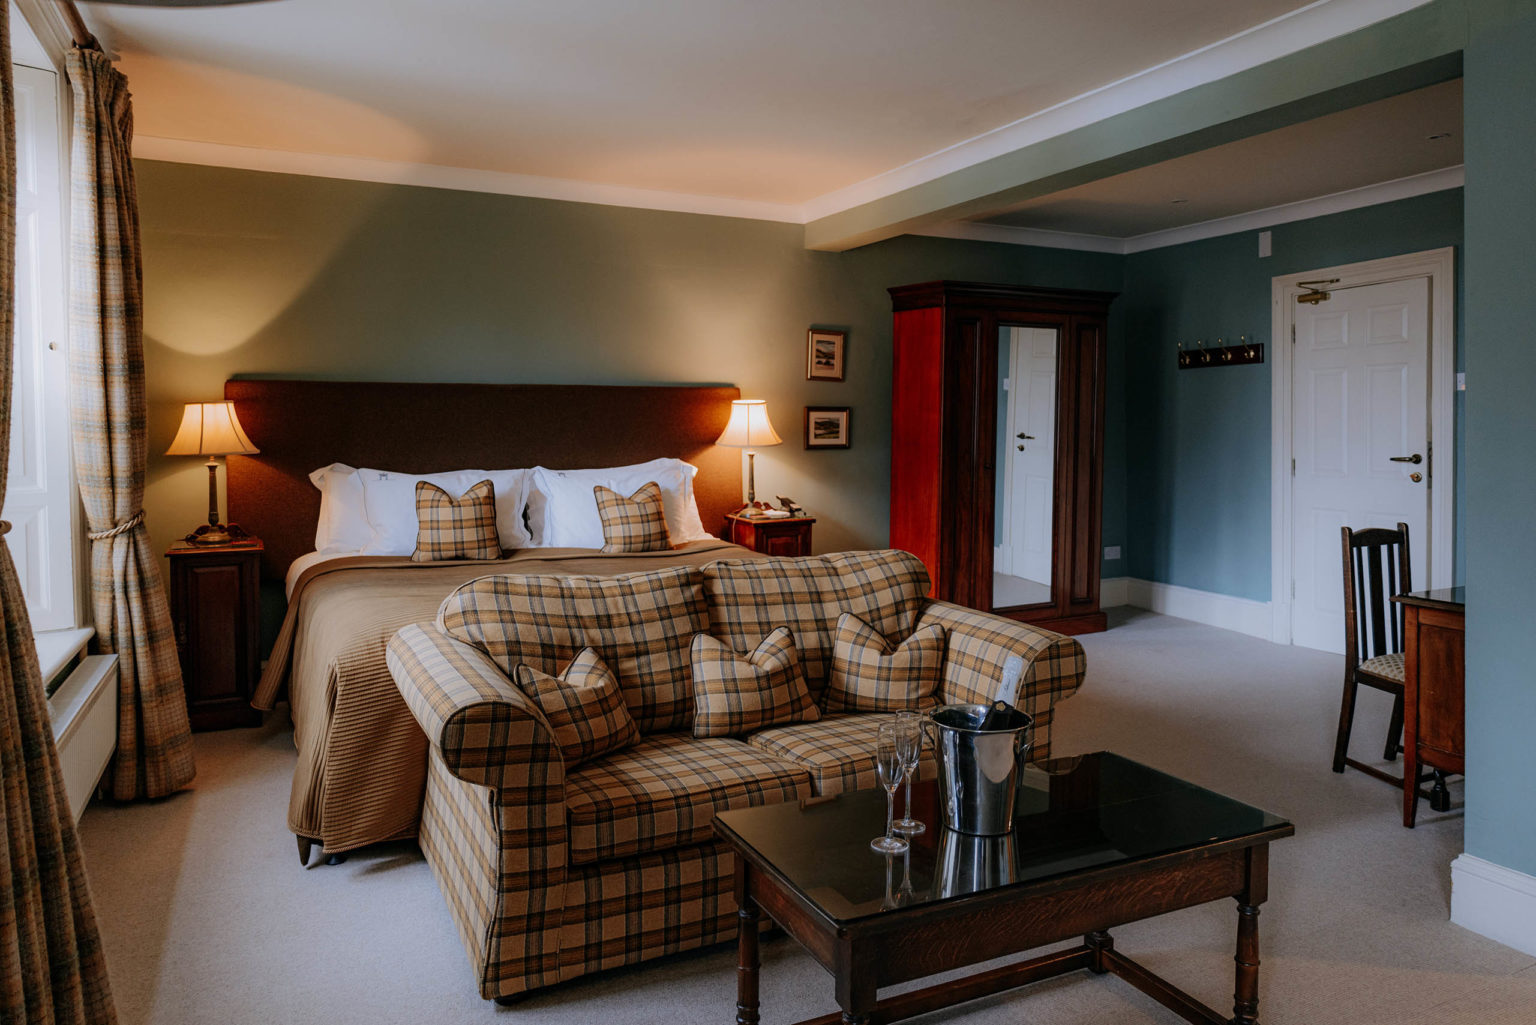 The Semerwater bedroom at Swinton Park Hotel in North Yorkshire